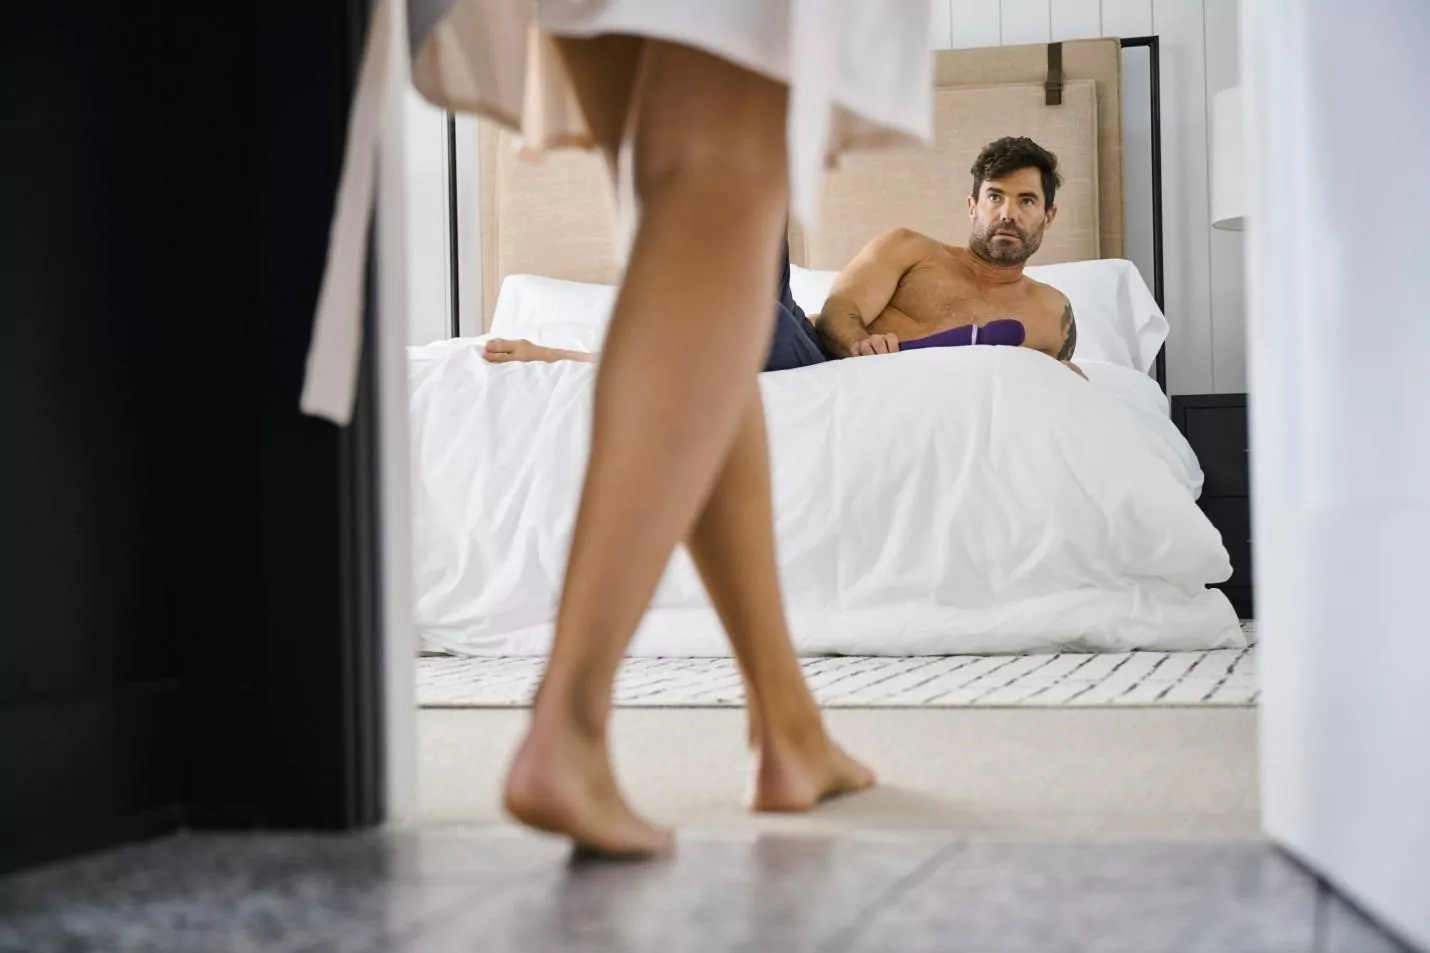 Delayed Ejaculation: Why do some men take so long to come?